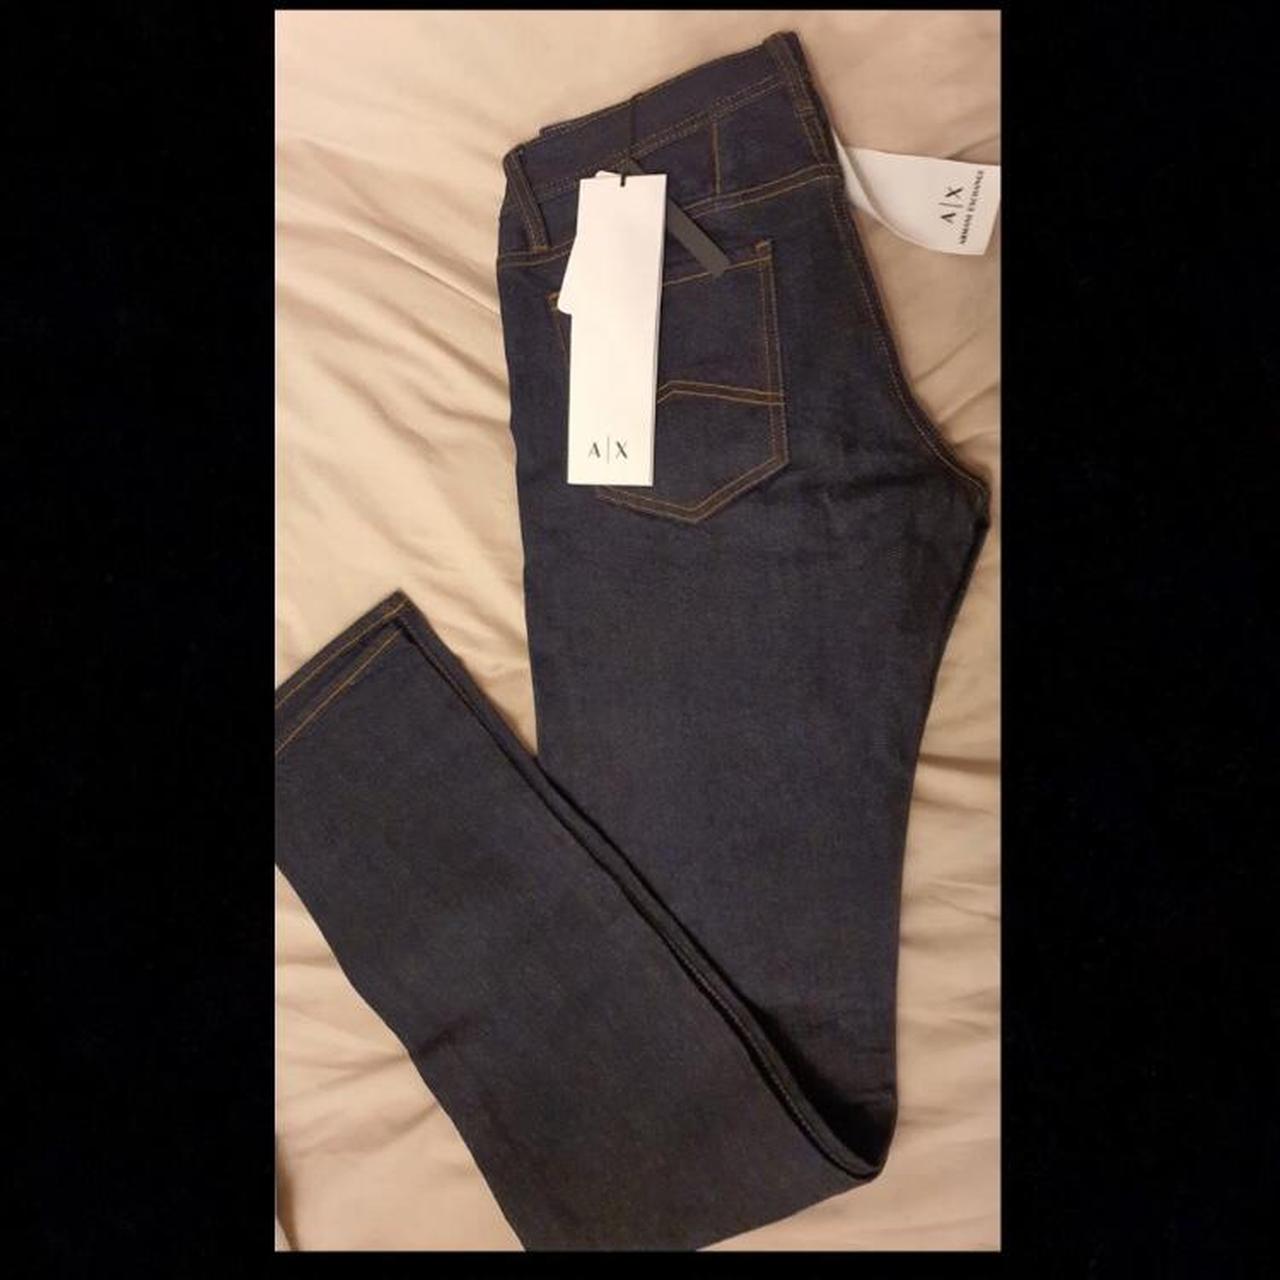 Armani Exchange Men's Navy and Blue Trousers | Depop